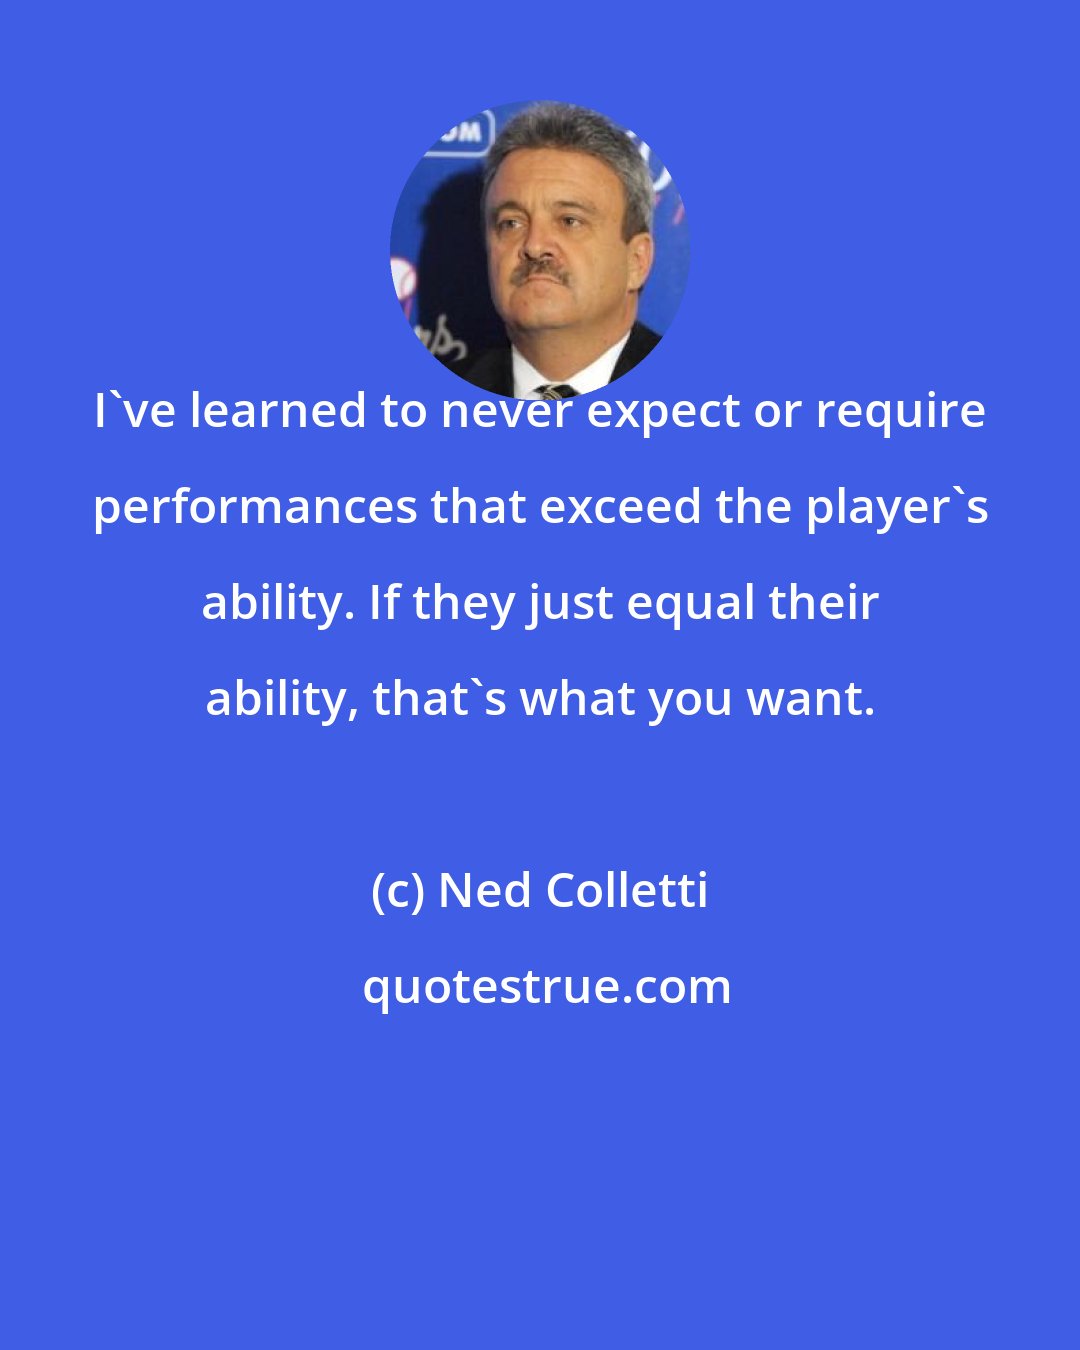 Ned Colletti: I've learned to never expect or require performances that exceed the player's ability. If they just equal their ability, that's what you want.